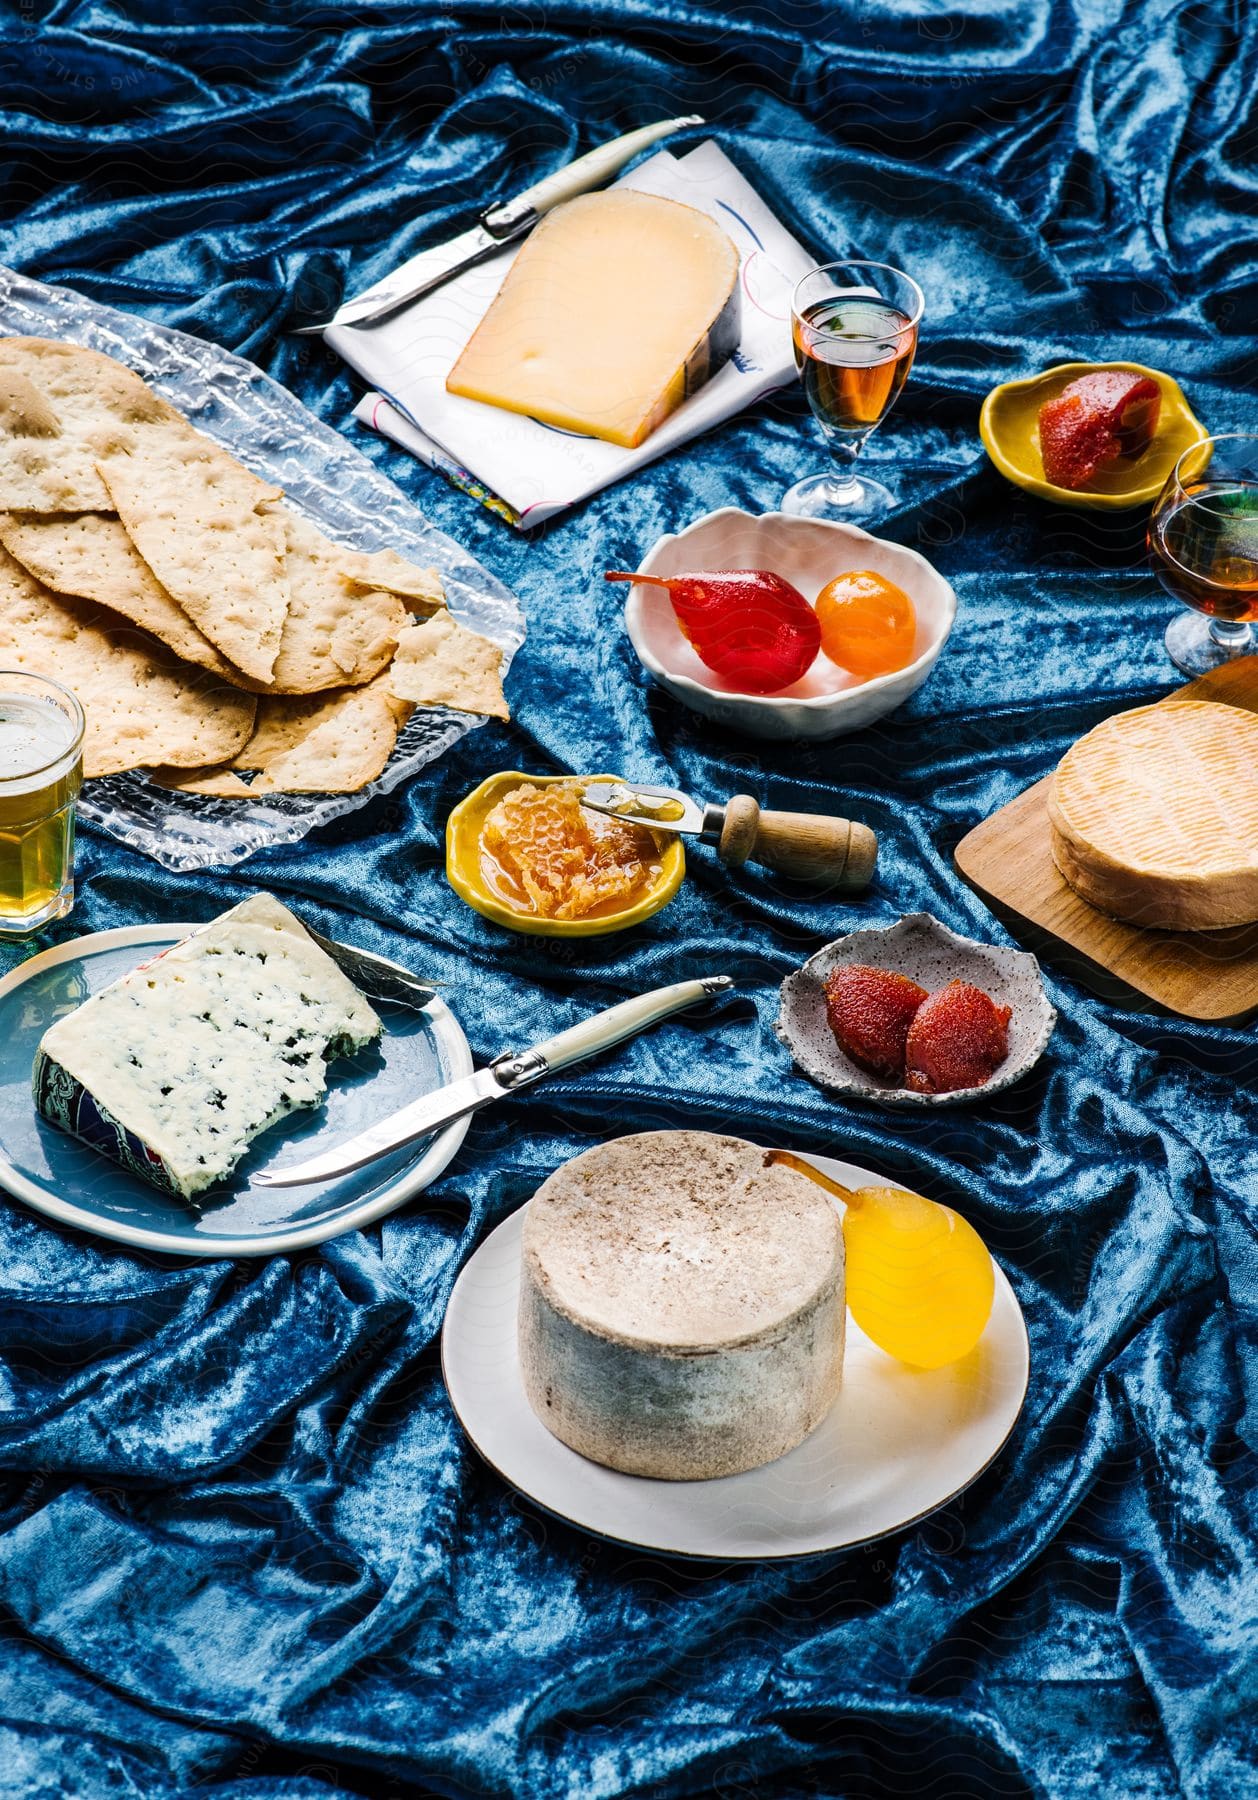 A bountiful blue velvet blanket spread with plates full of food, drinks, cheese, fruits, nan bread and cheeseboards, accompanied by knives and a variety of alcoholic drinks in various glasses.